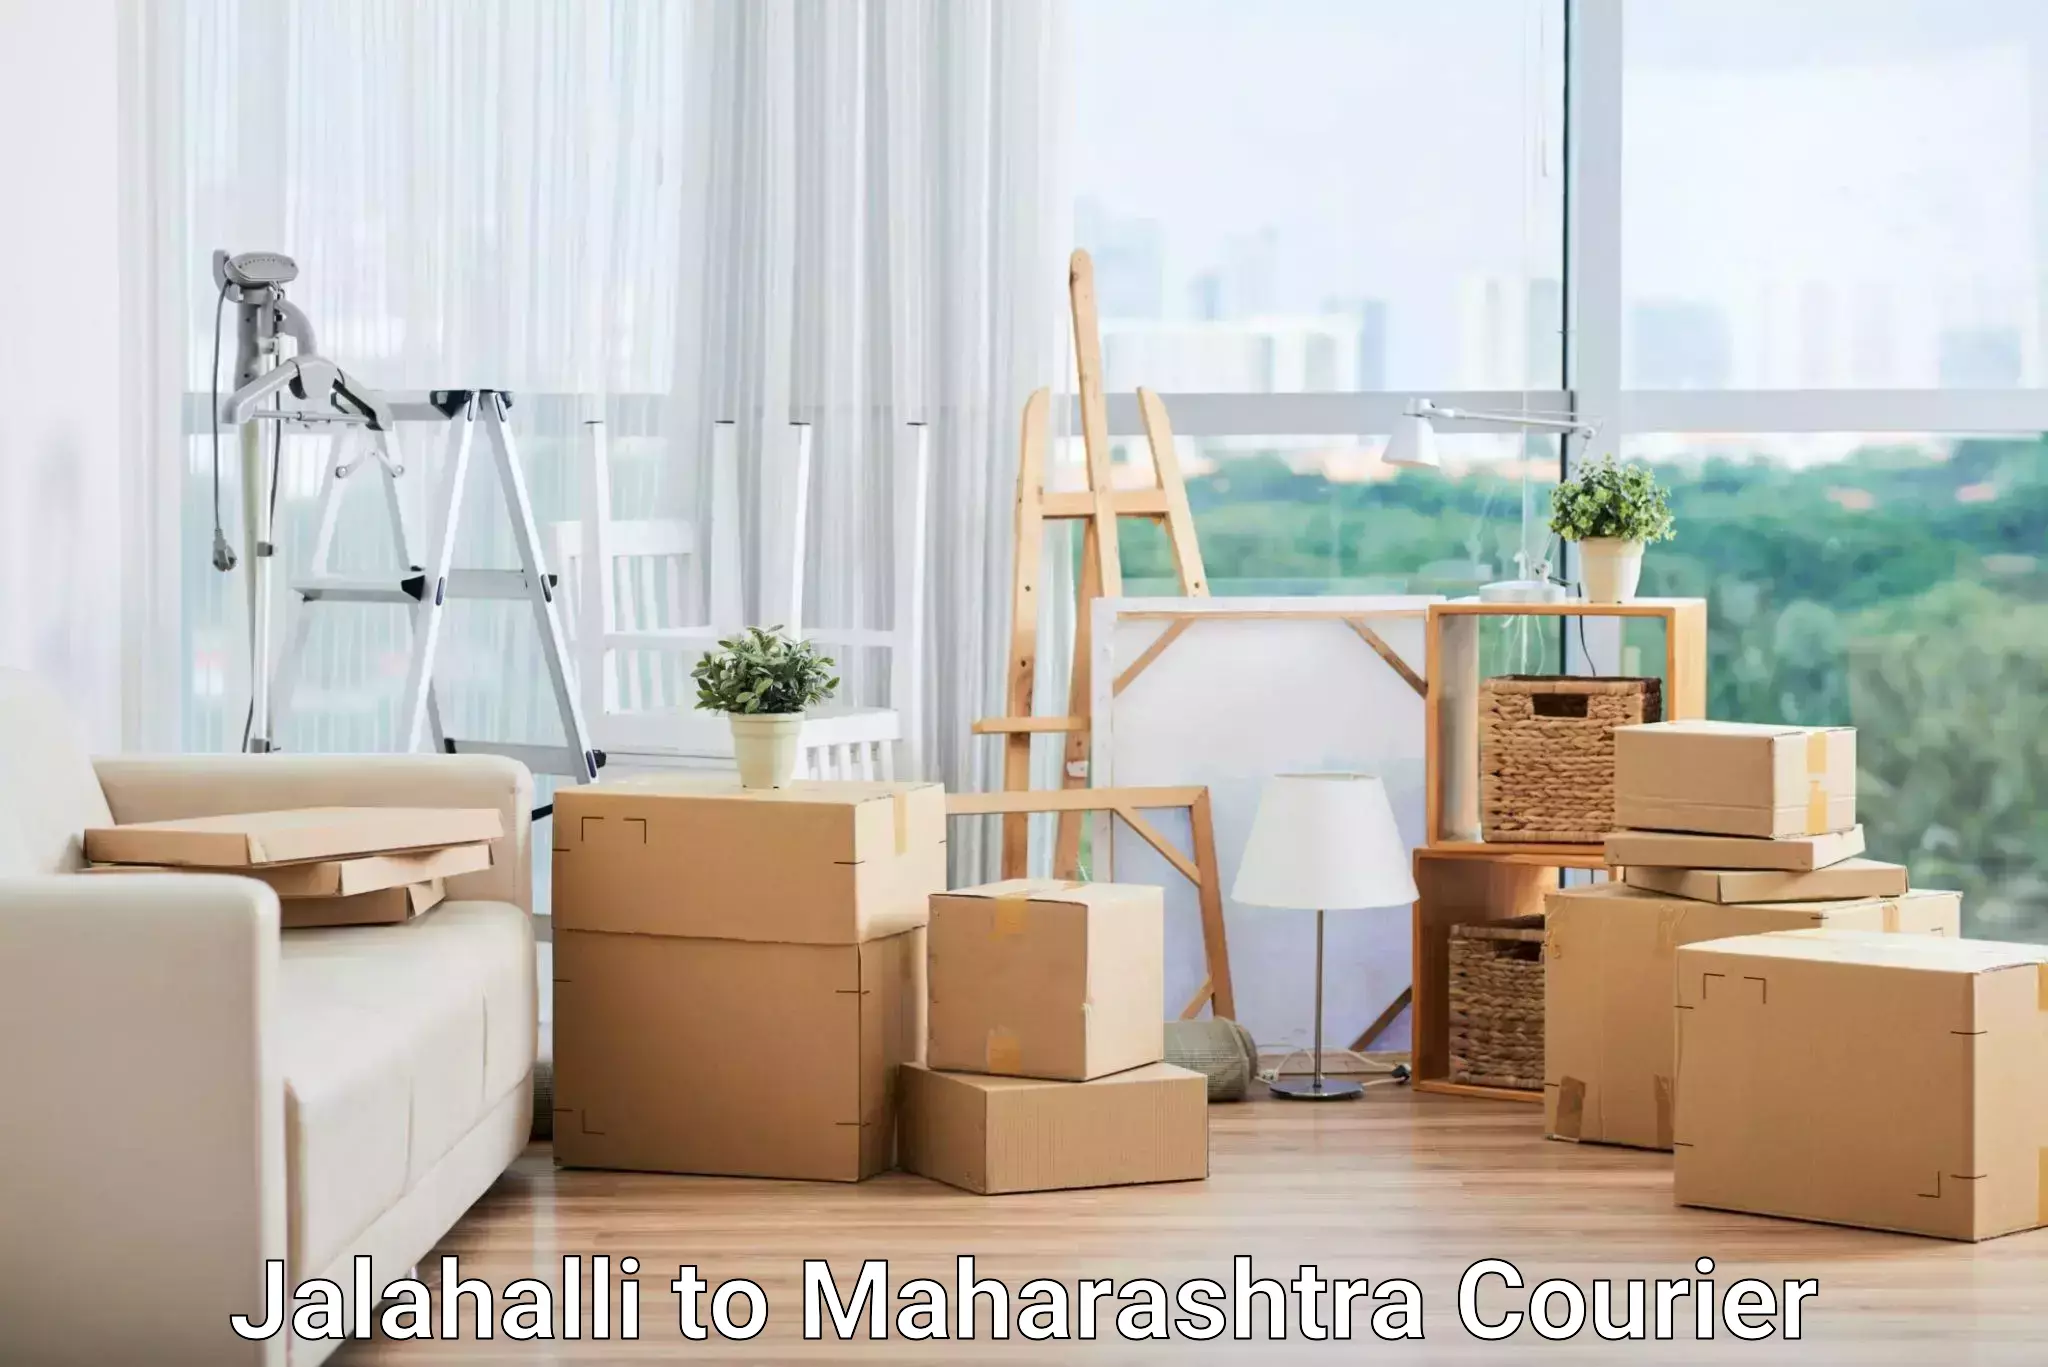 Package delivery network Jalahalli to Thane